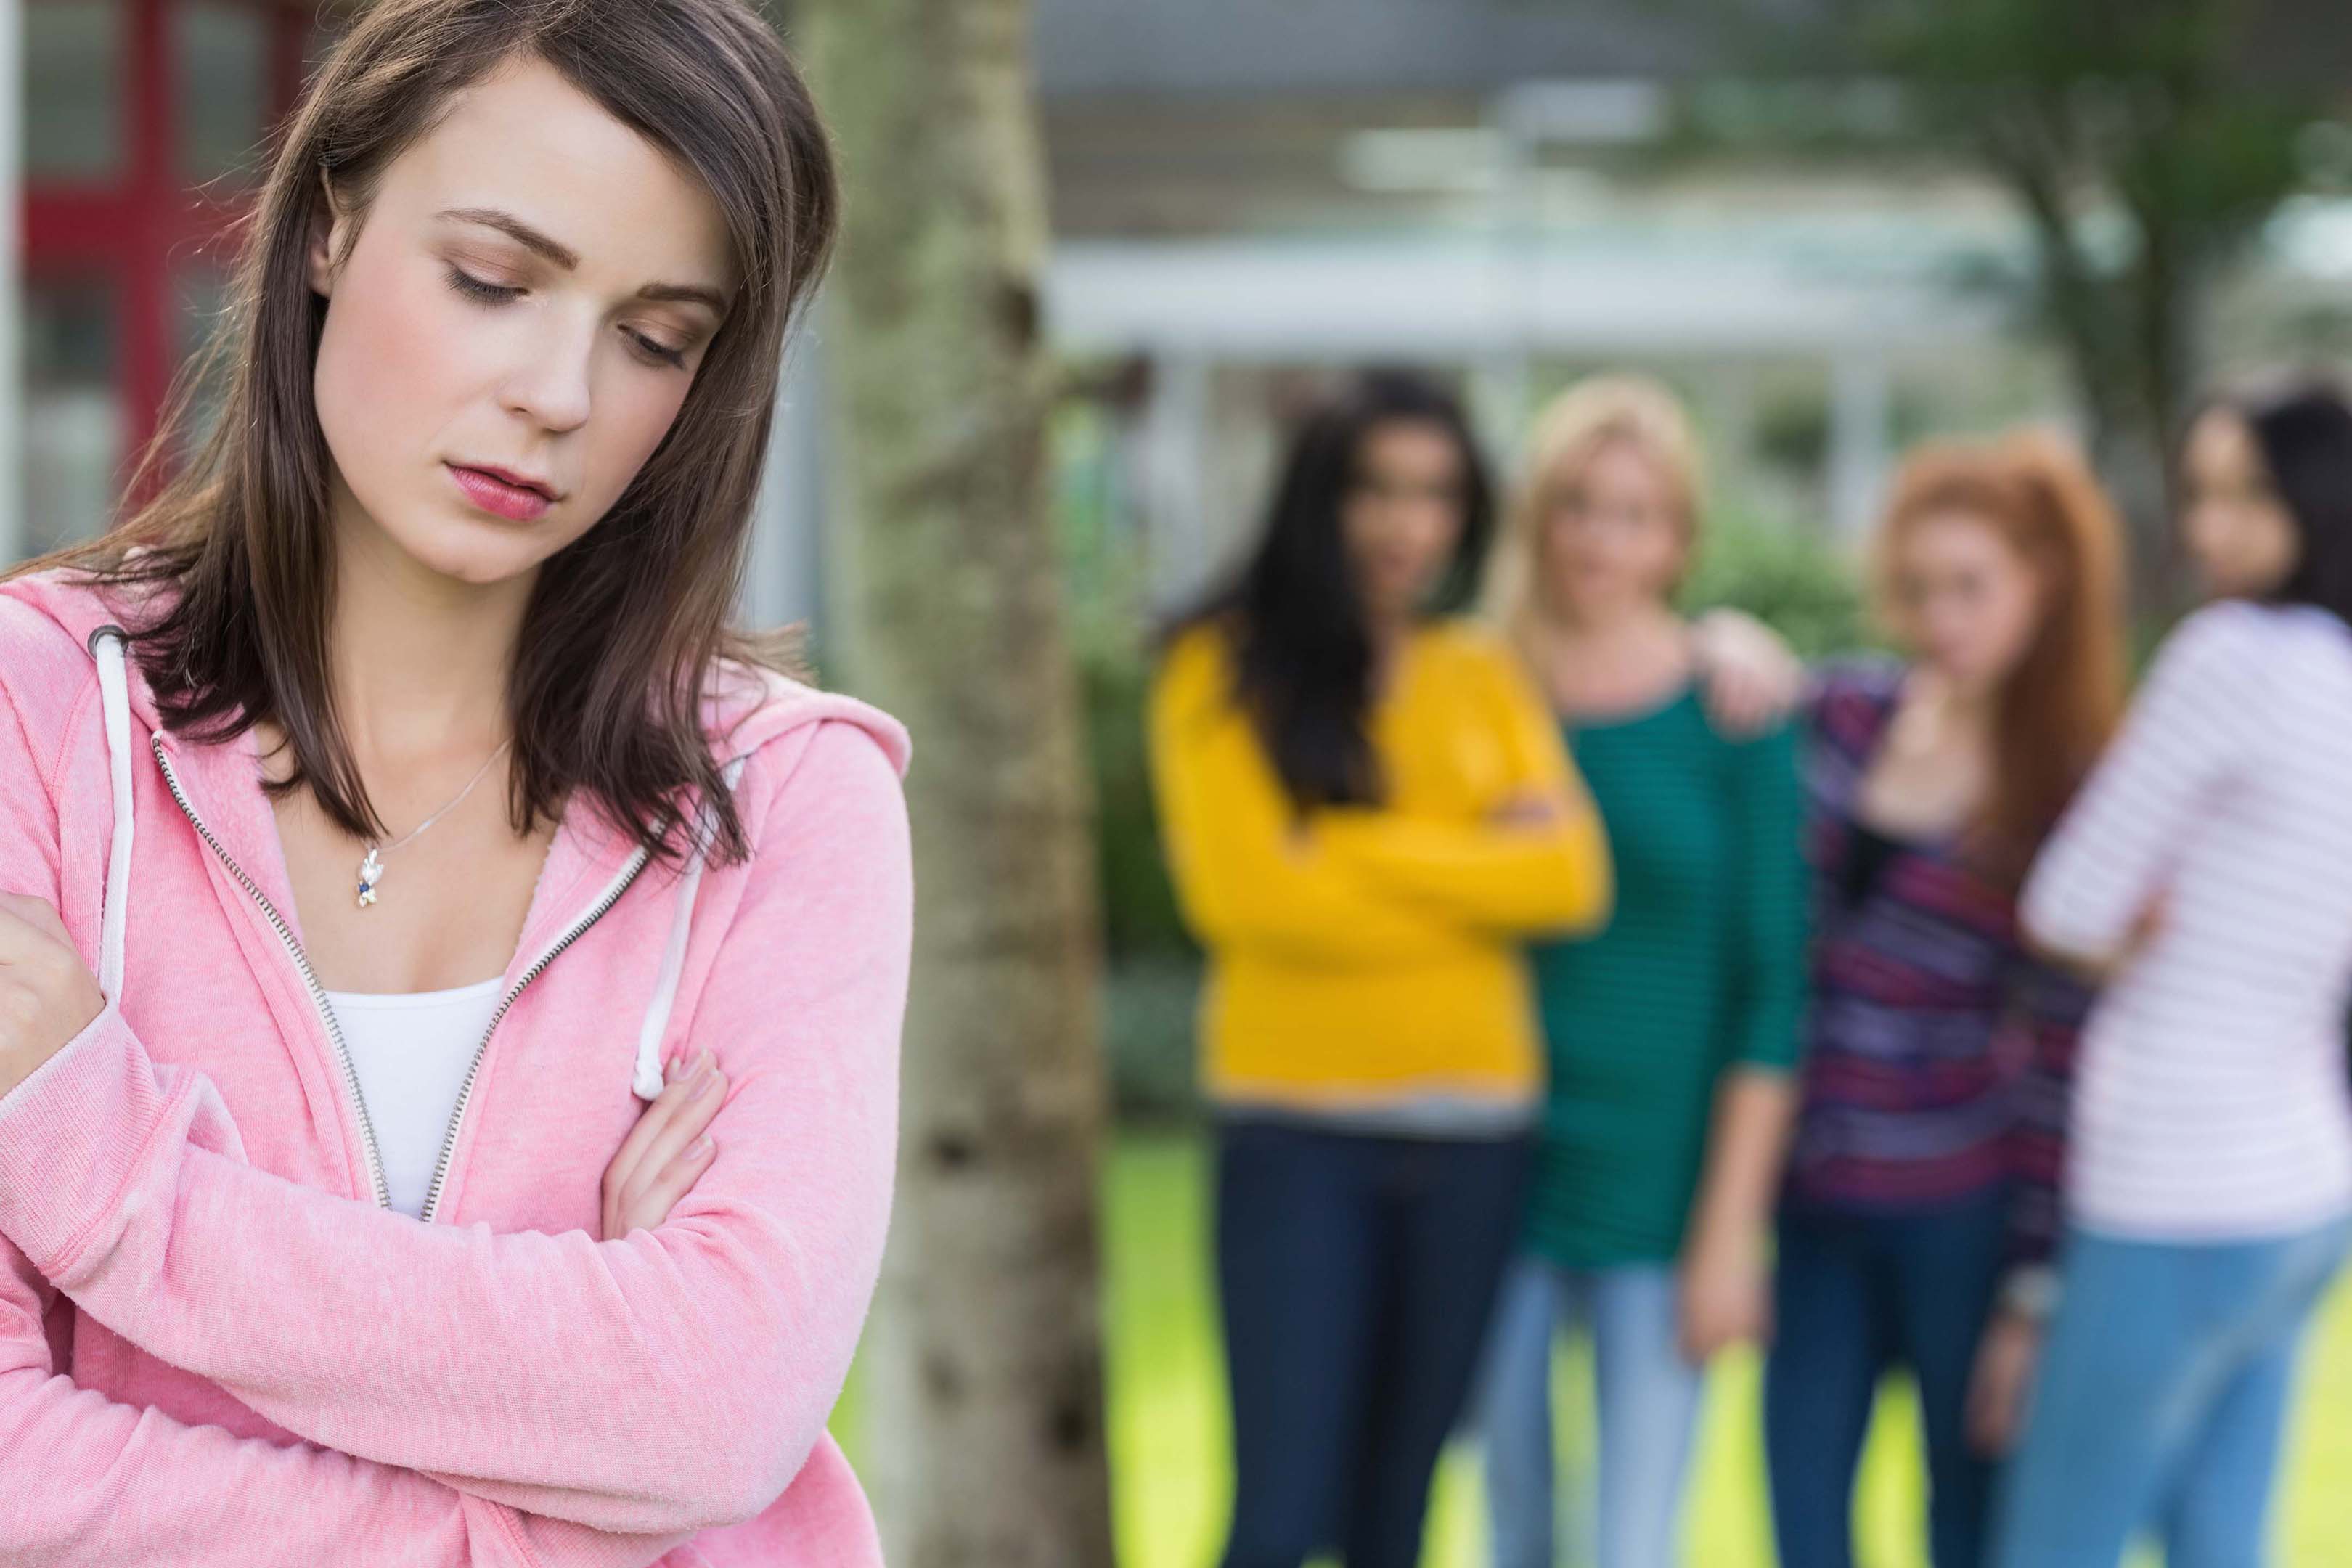 Young woman student appears bullied by other female students